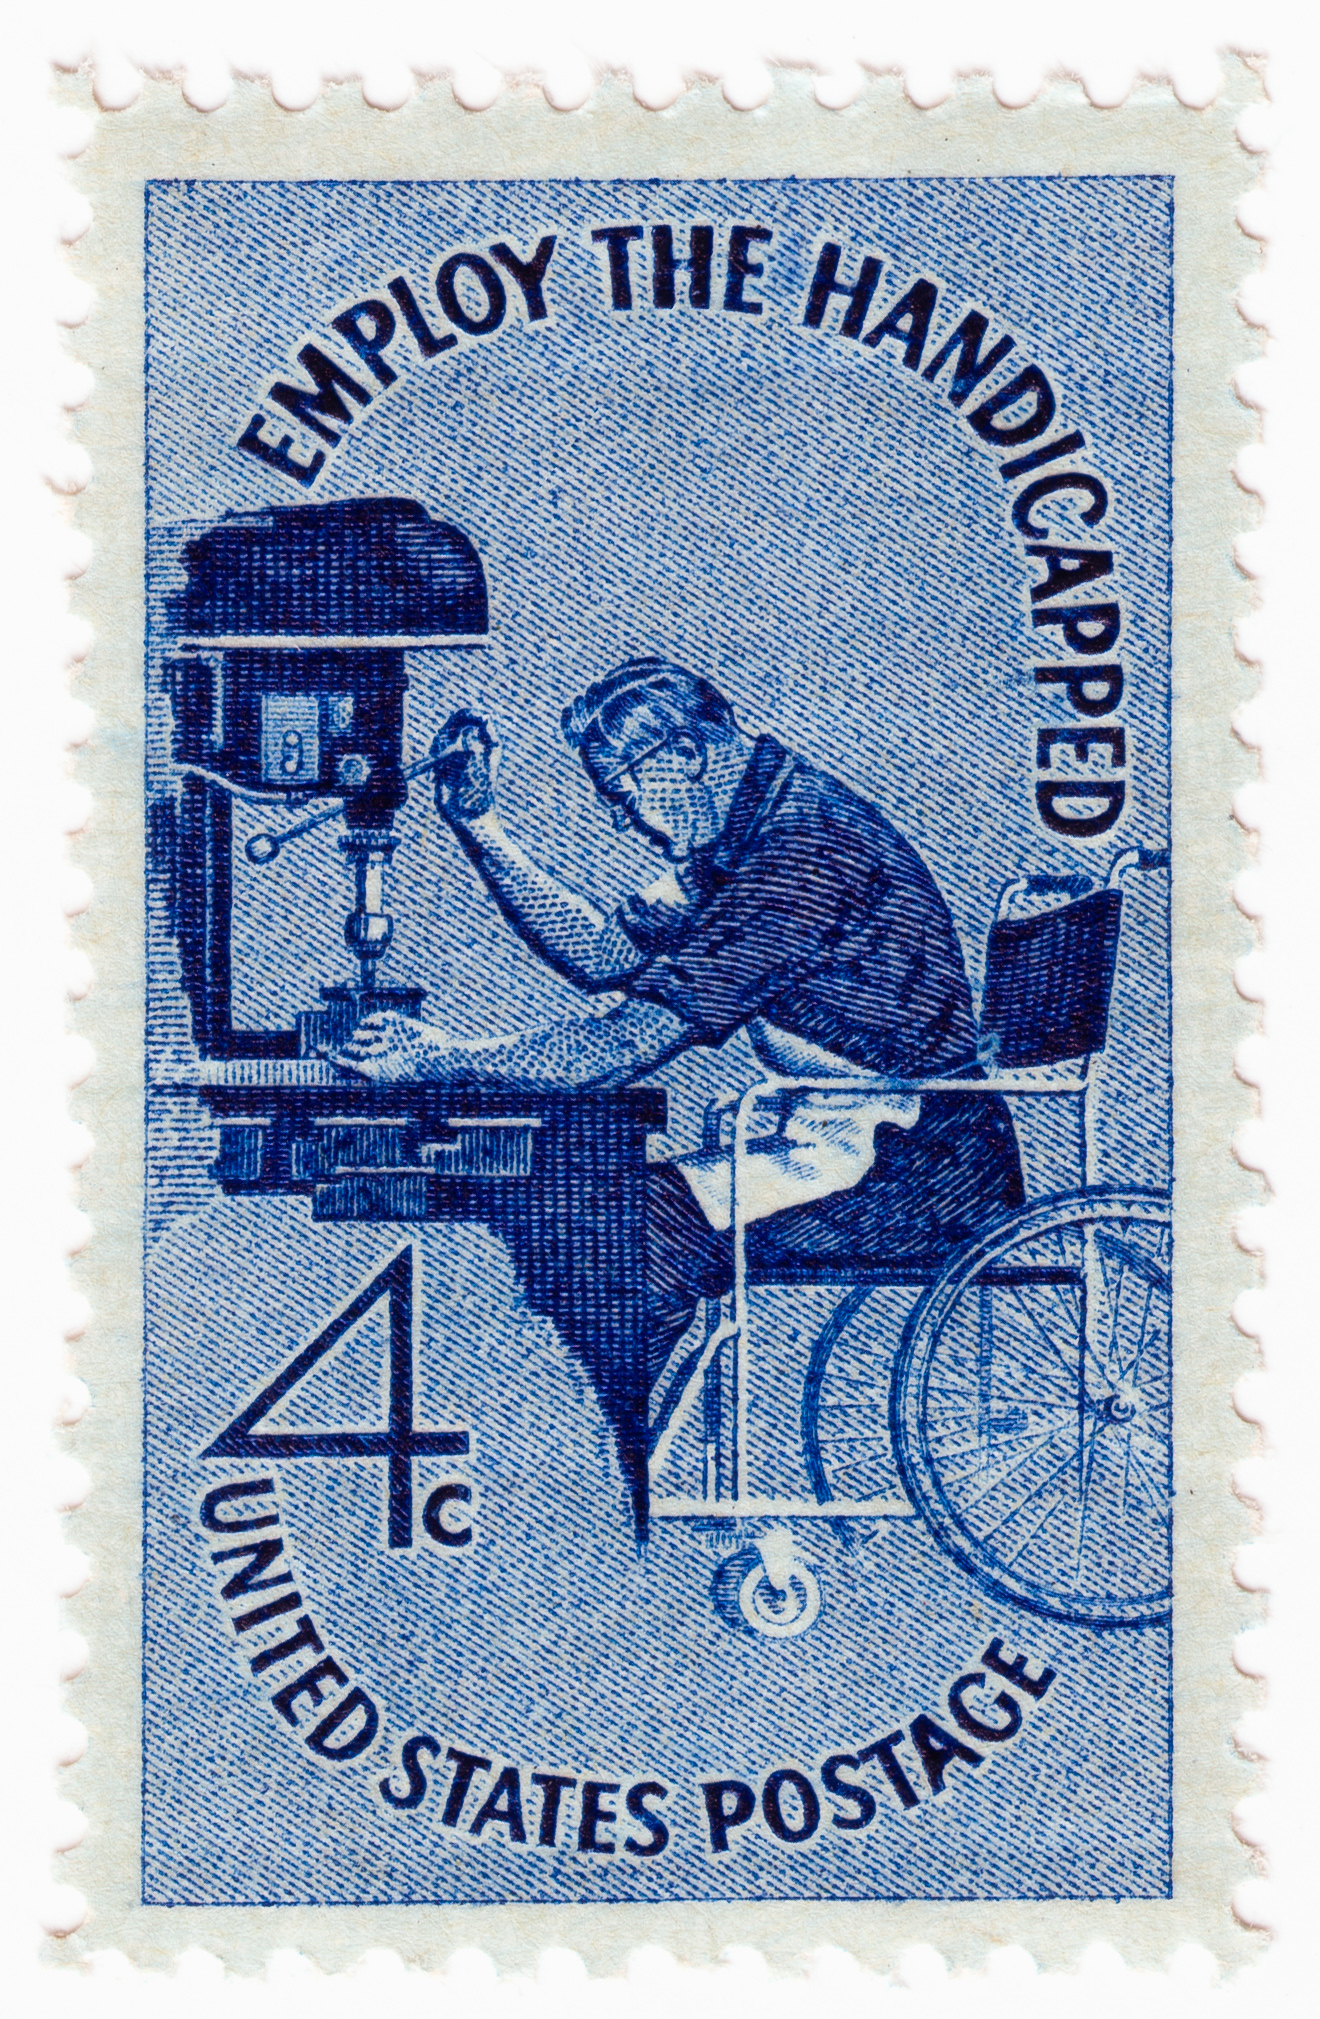 Employ the Handicapped (1960)